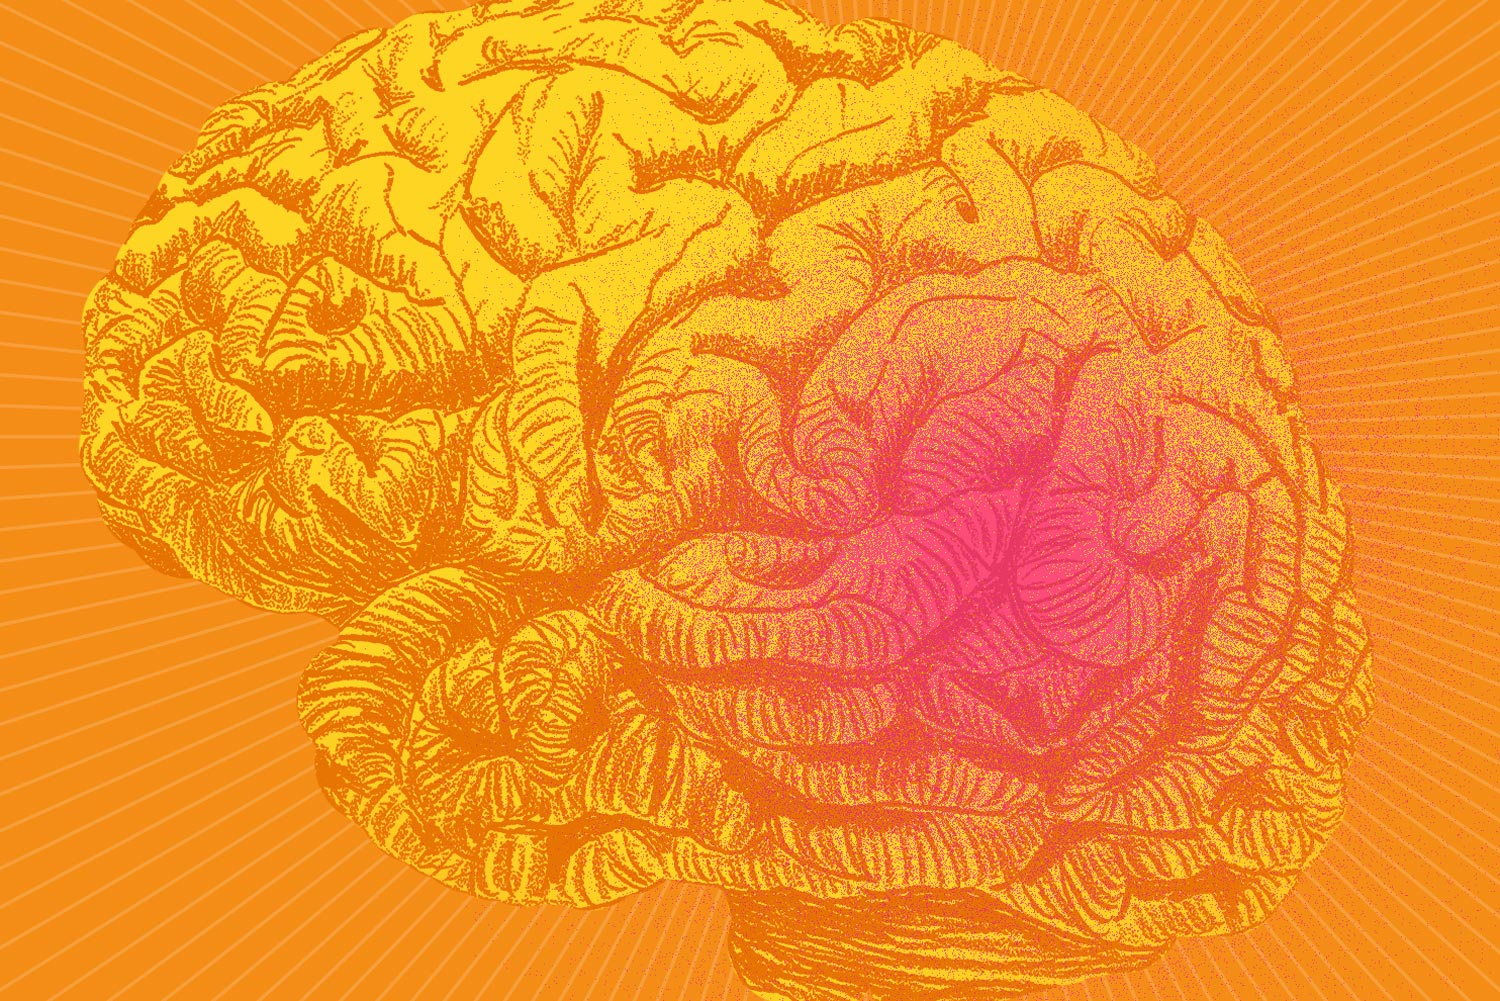 illustration of a brain with one section colored red